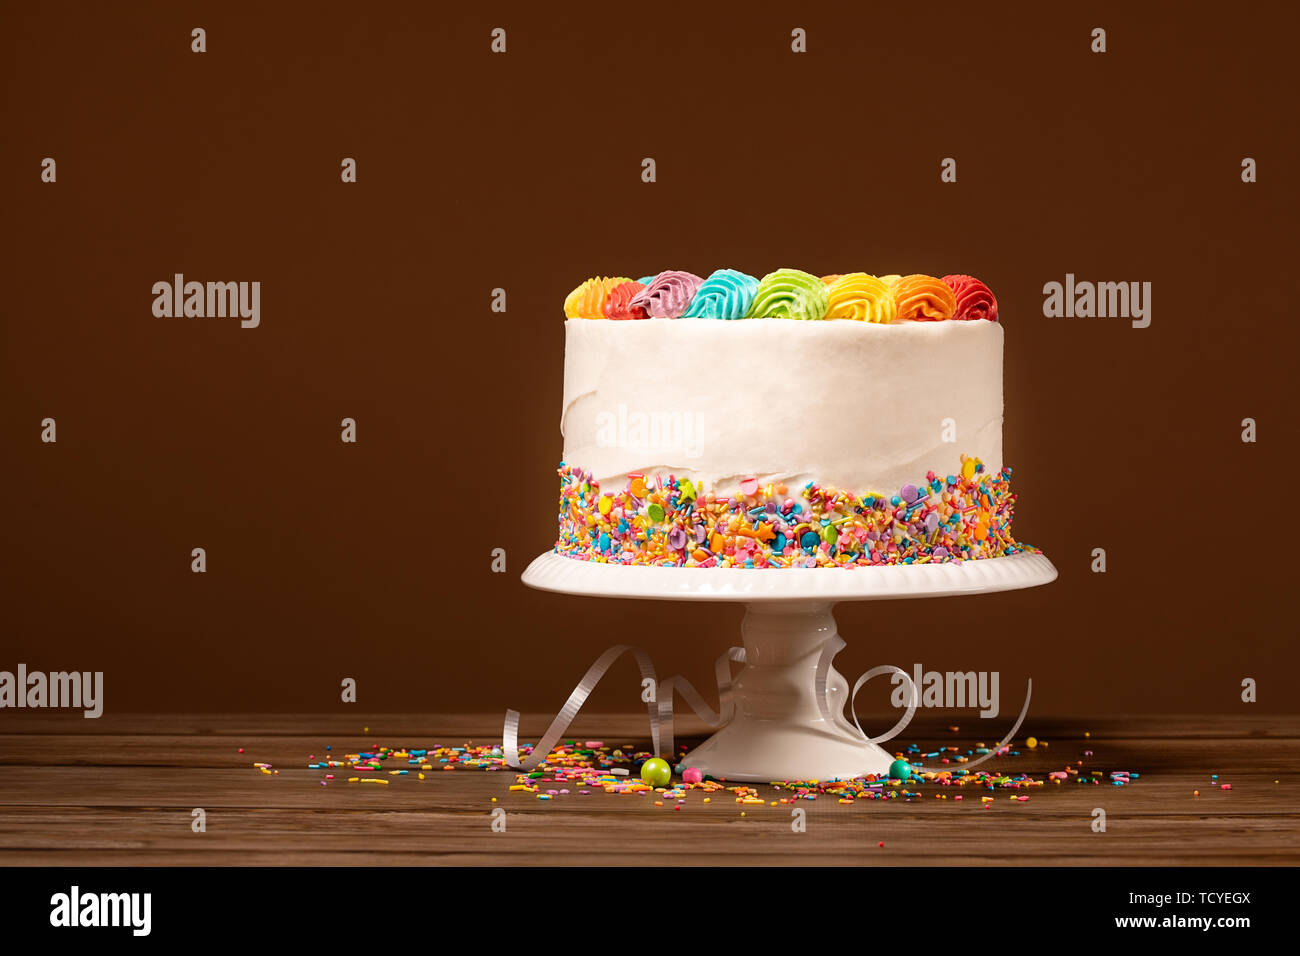 Birthday Cake With Rainbow Icing And Colorful Sprinkles Against A Brown Background Stock Photo Alamy